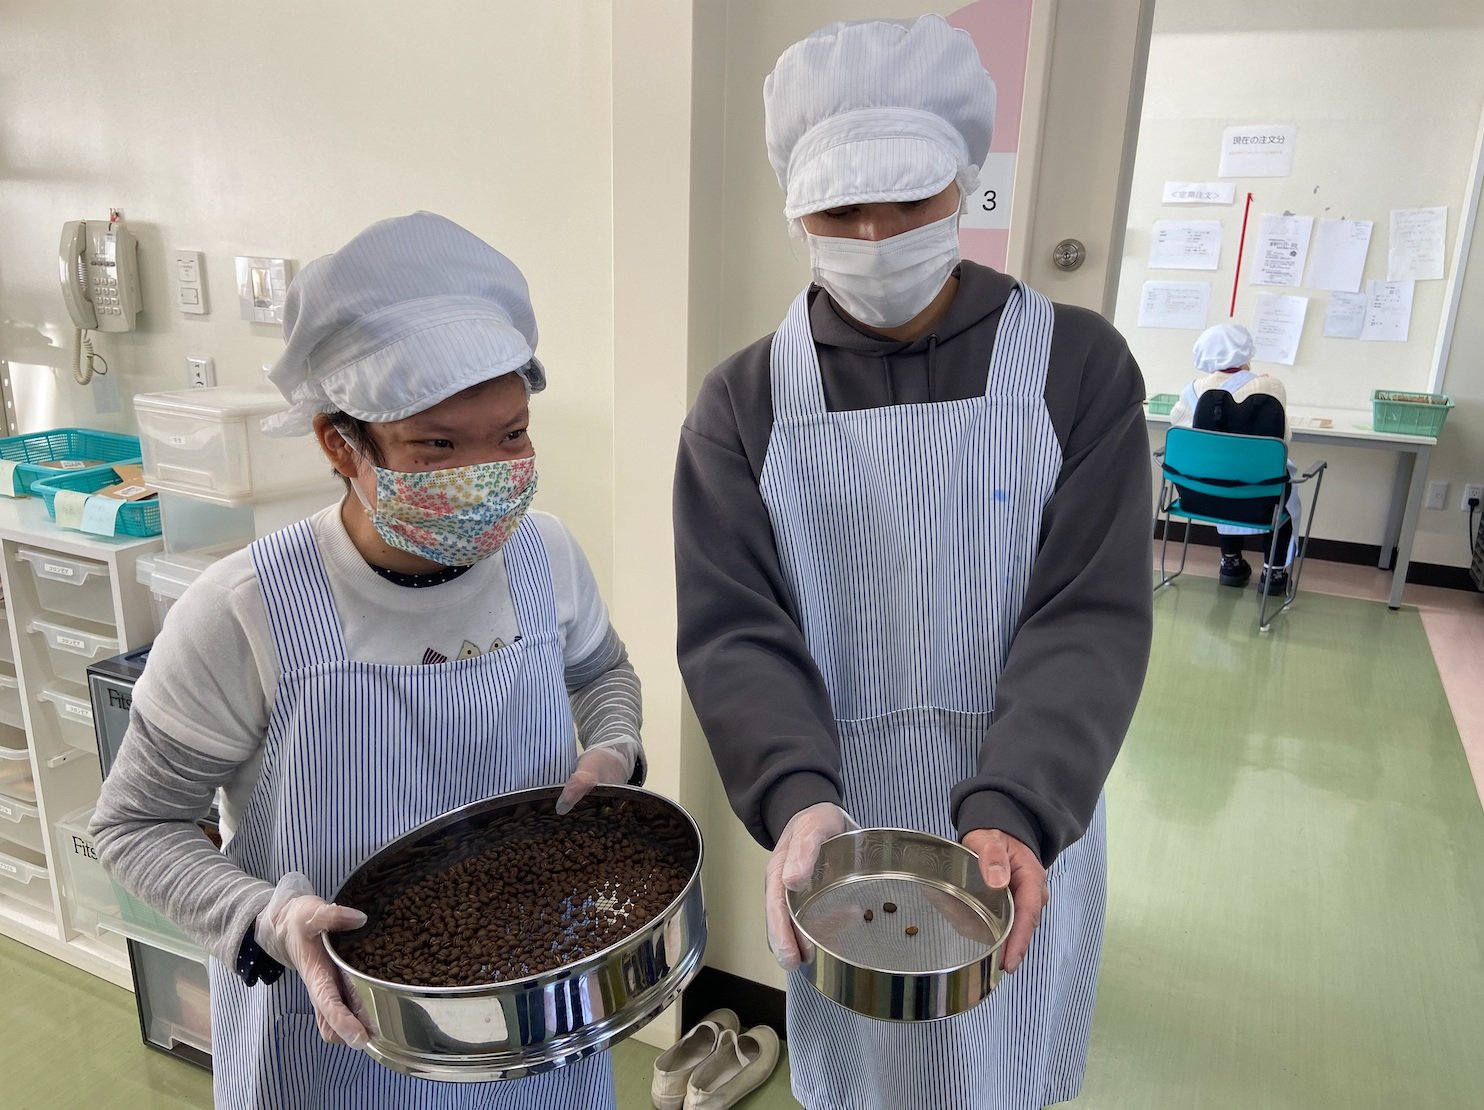  Junko (user) and a volunteer holding a bowl of coffee beans 